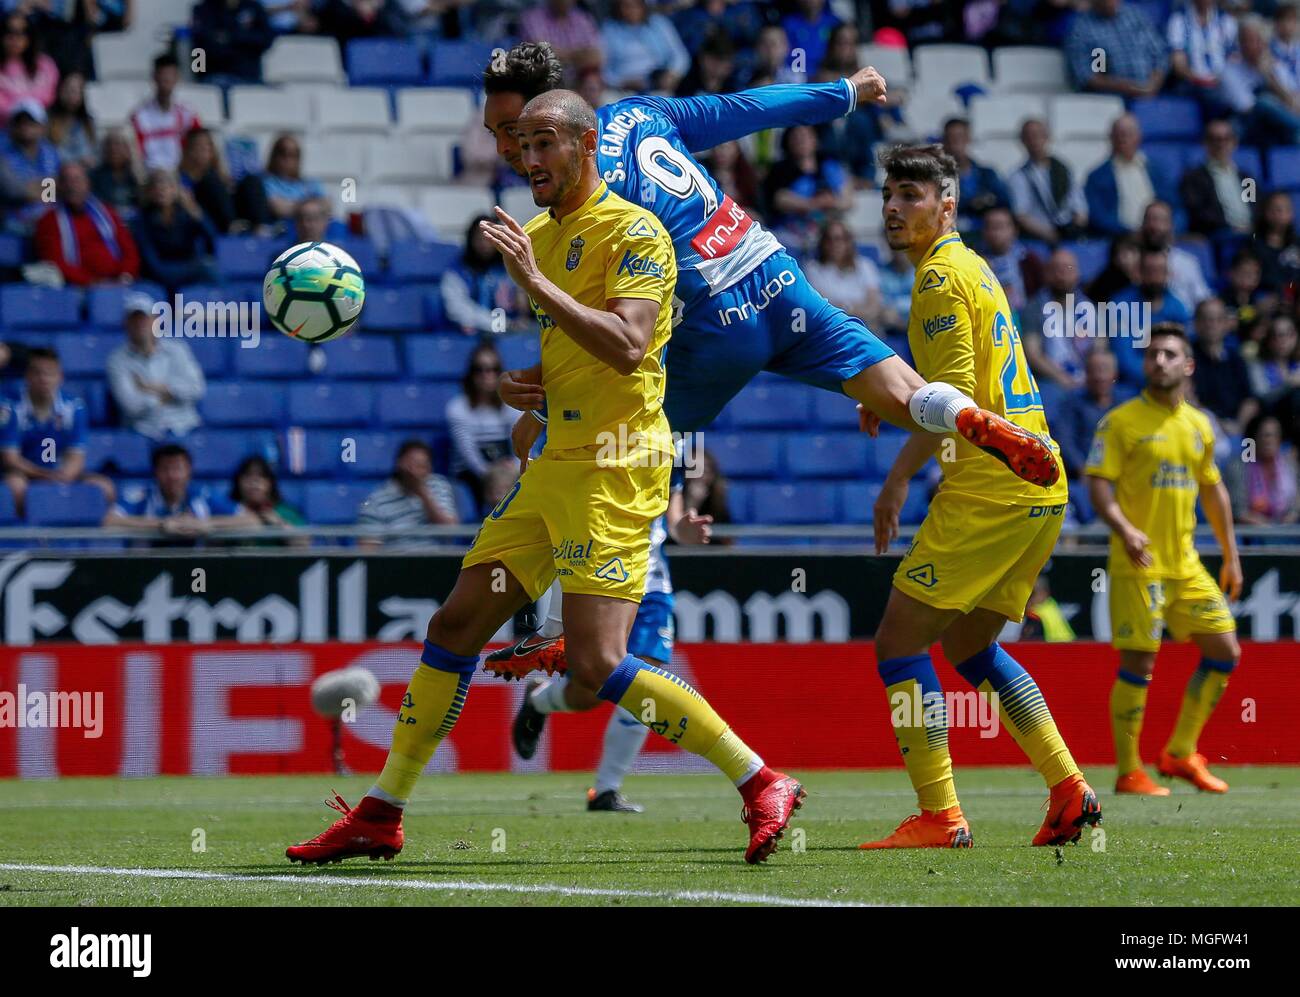 Barcelona, Spain. 28th Apr, 2018. RCD Espanyol's Sergio Garcia (C) competes during a Spanish league match between RCD Espanyol and Las Palmas in Barcelona, Spain, on April 28, 2018. The match ended 1-1. Credit: Joan Gosa/Xinhua/Alamy Live News Stock Photo